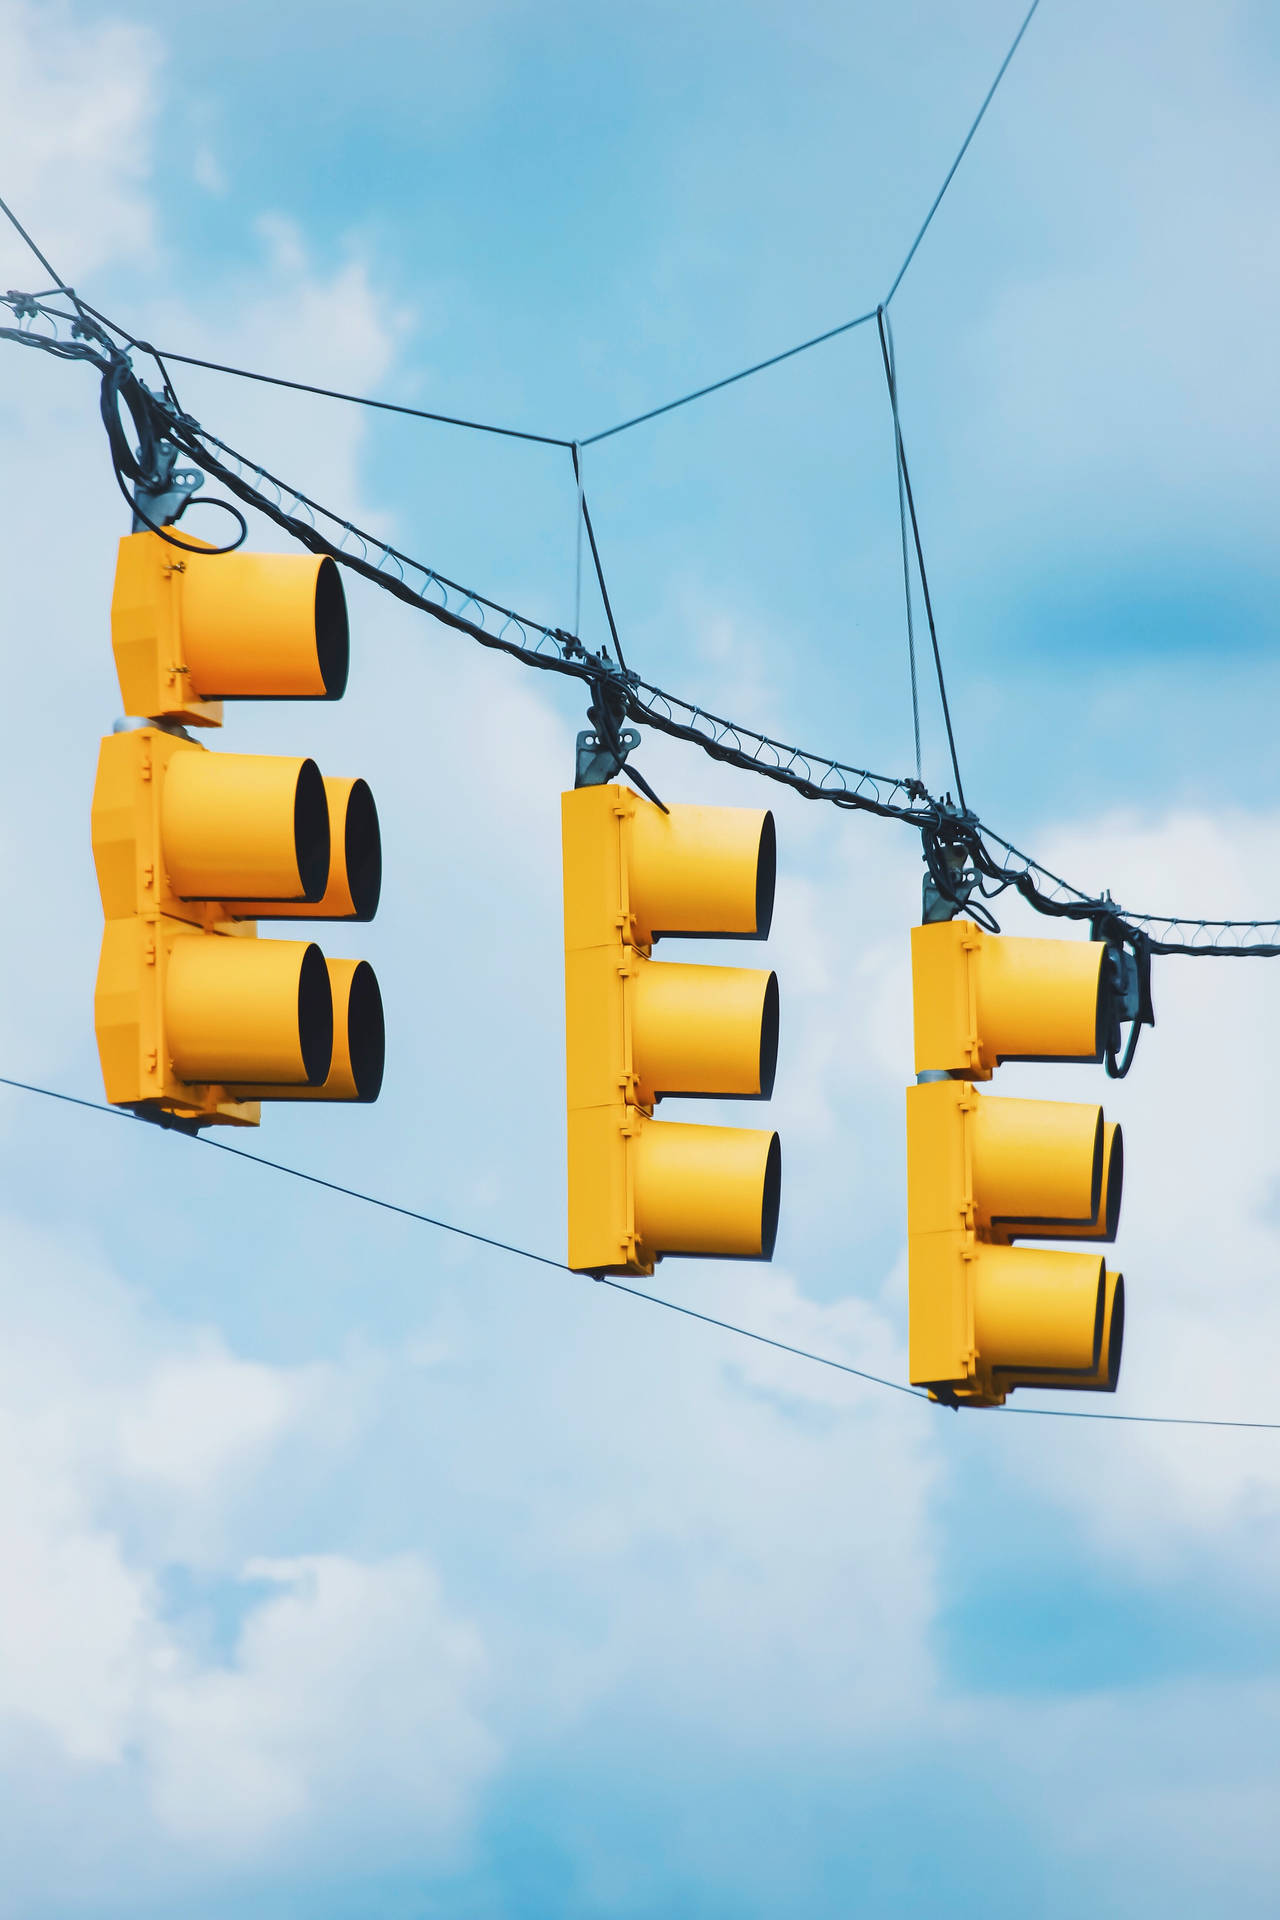 Suspended Yellow Traffic Lights against a Clear Sky Wallpaper